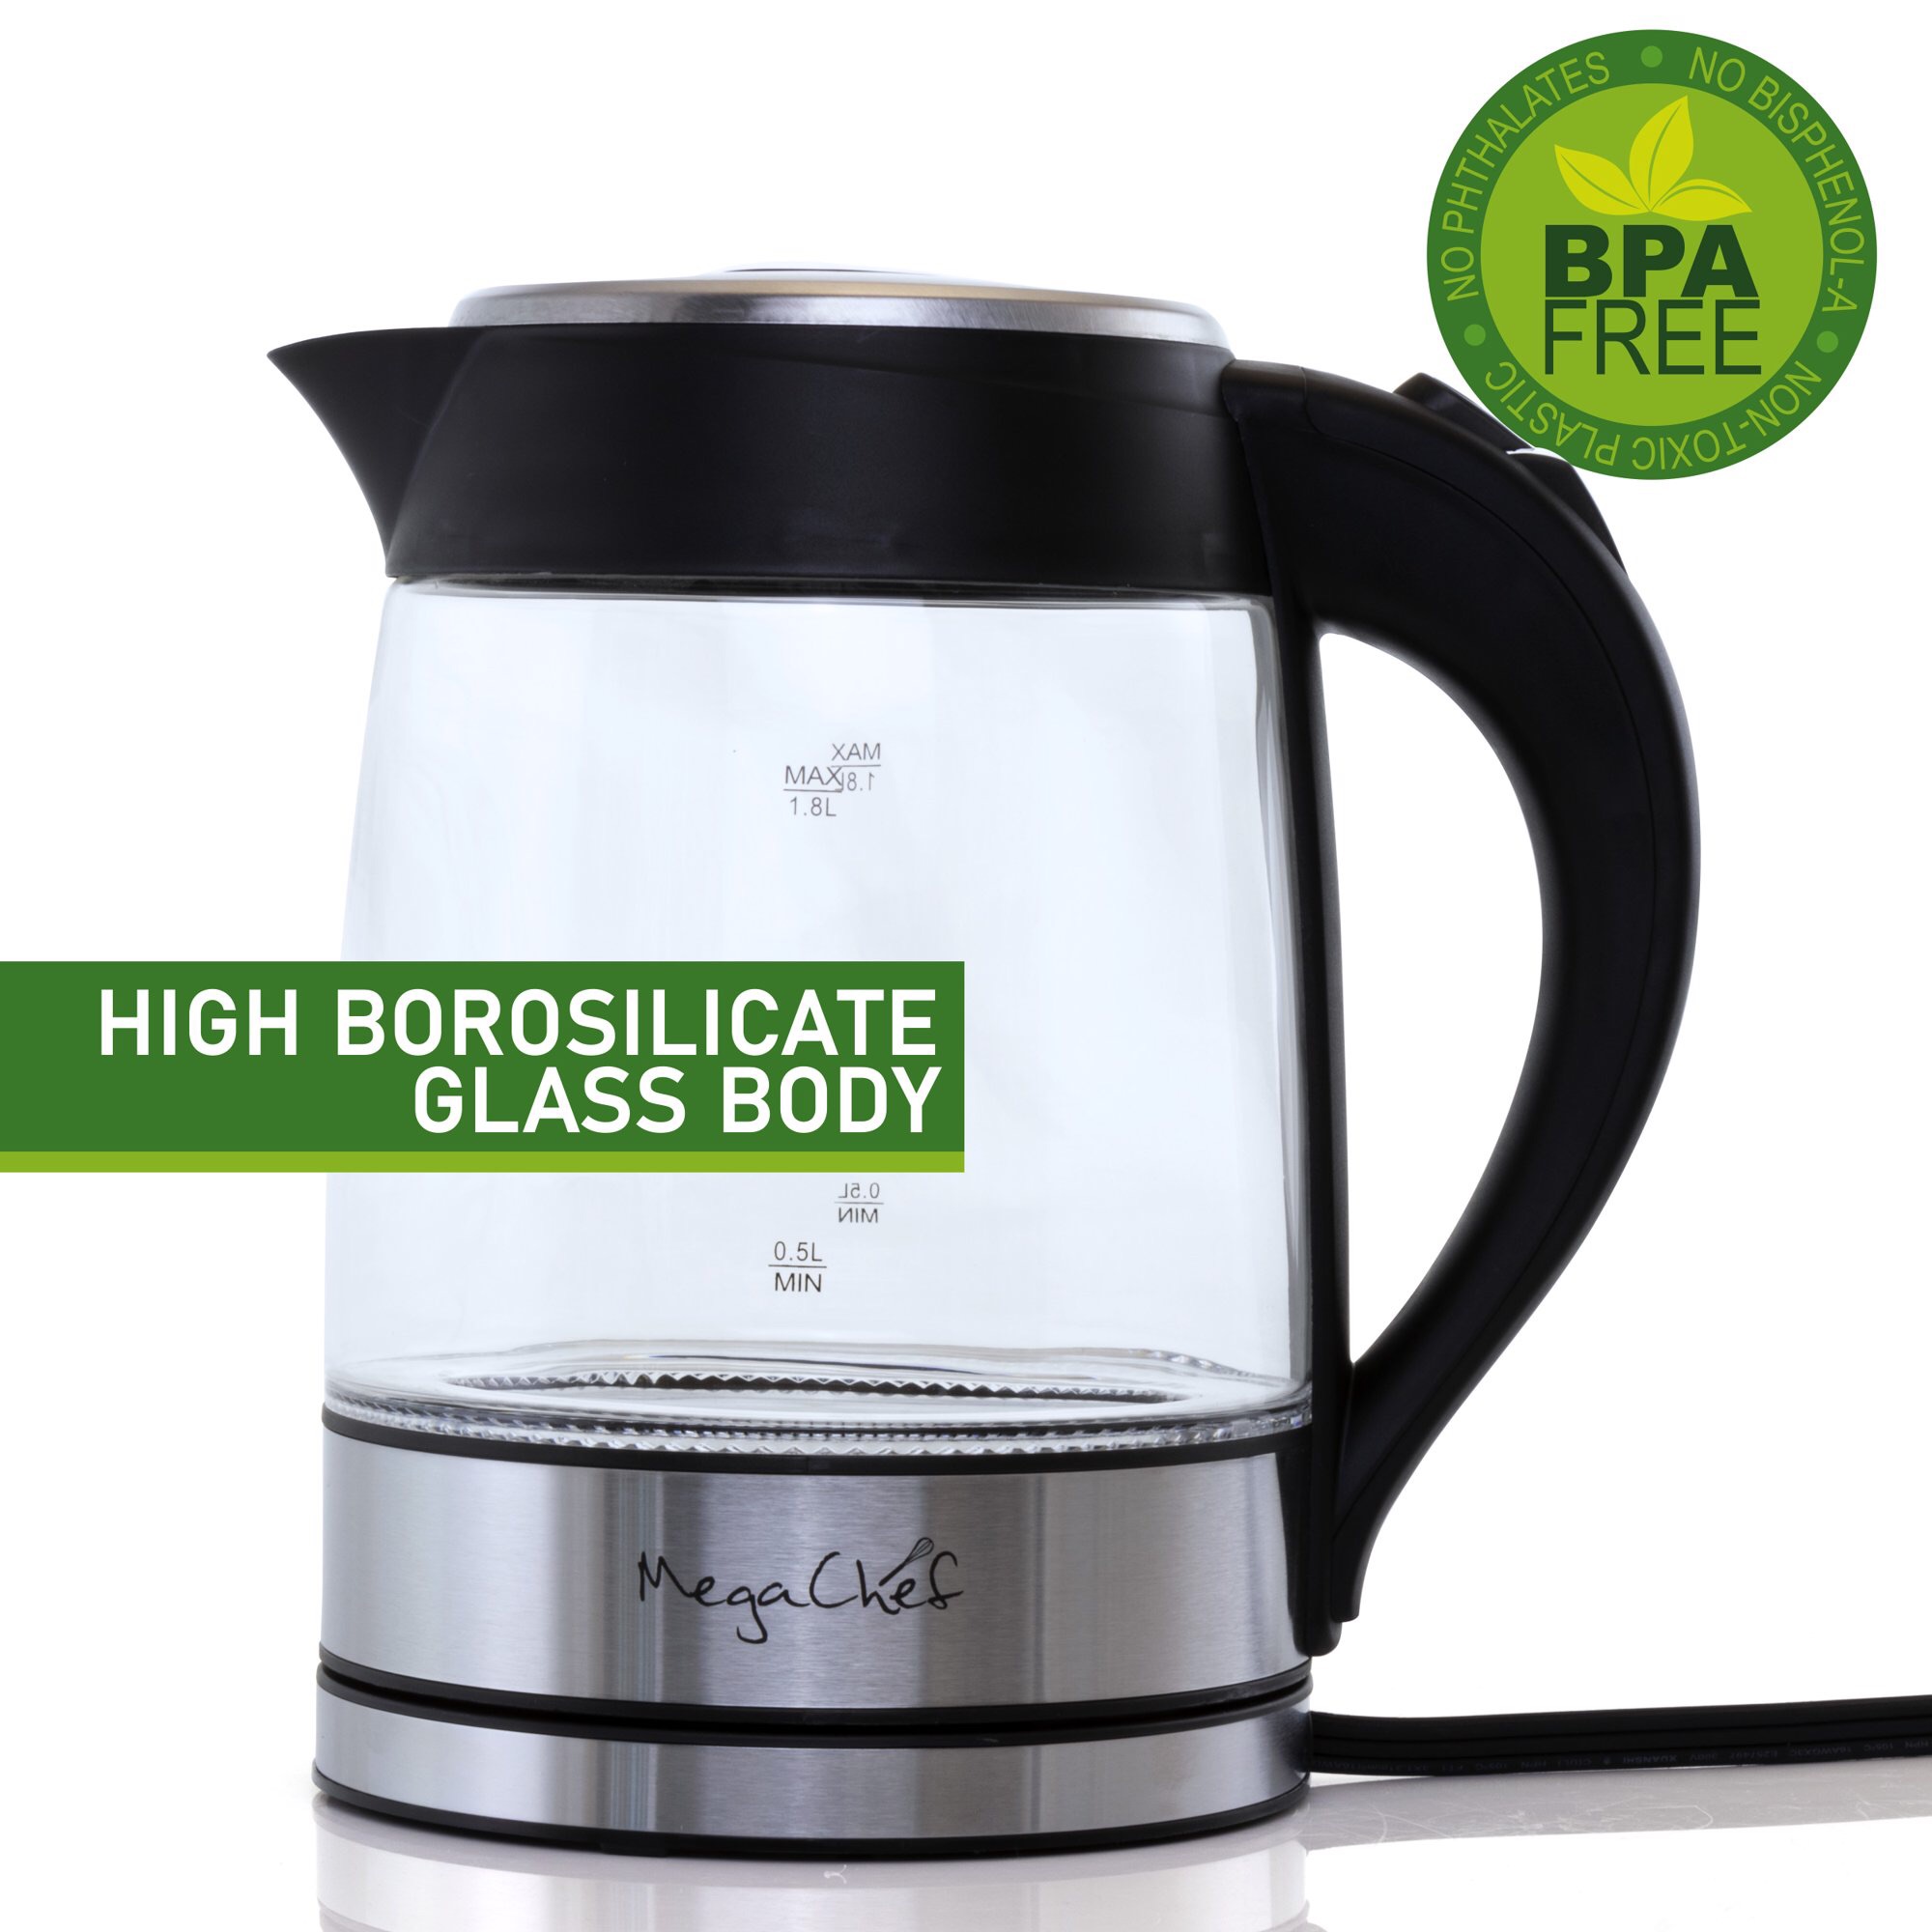 MegaChef 1.8 Liter Glass and Stainless Steel Electric Tea Kettle 冷水壶